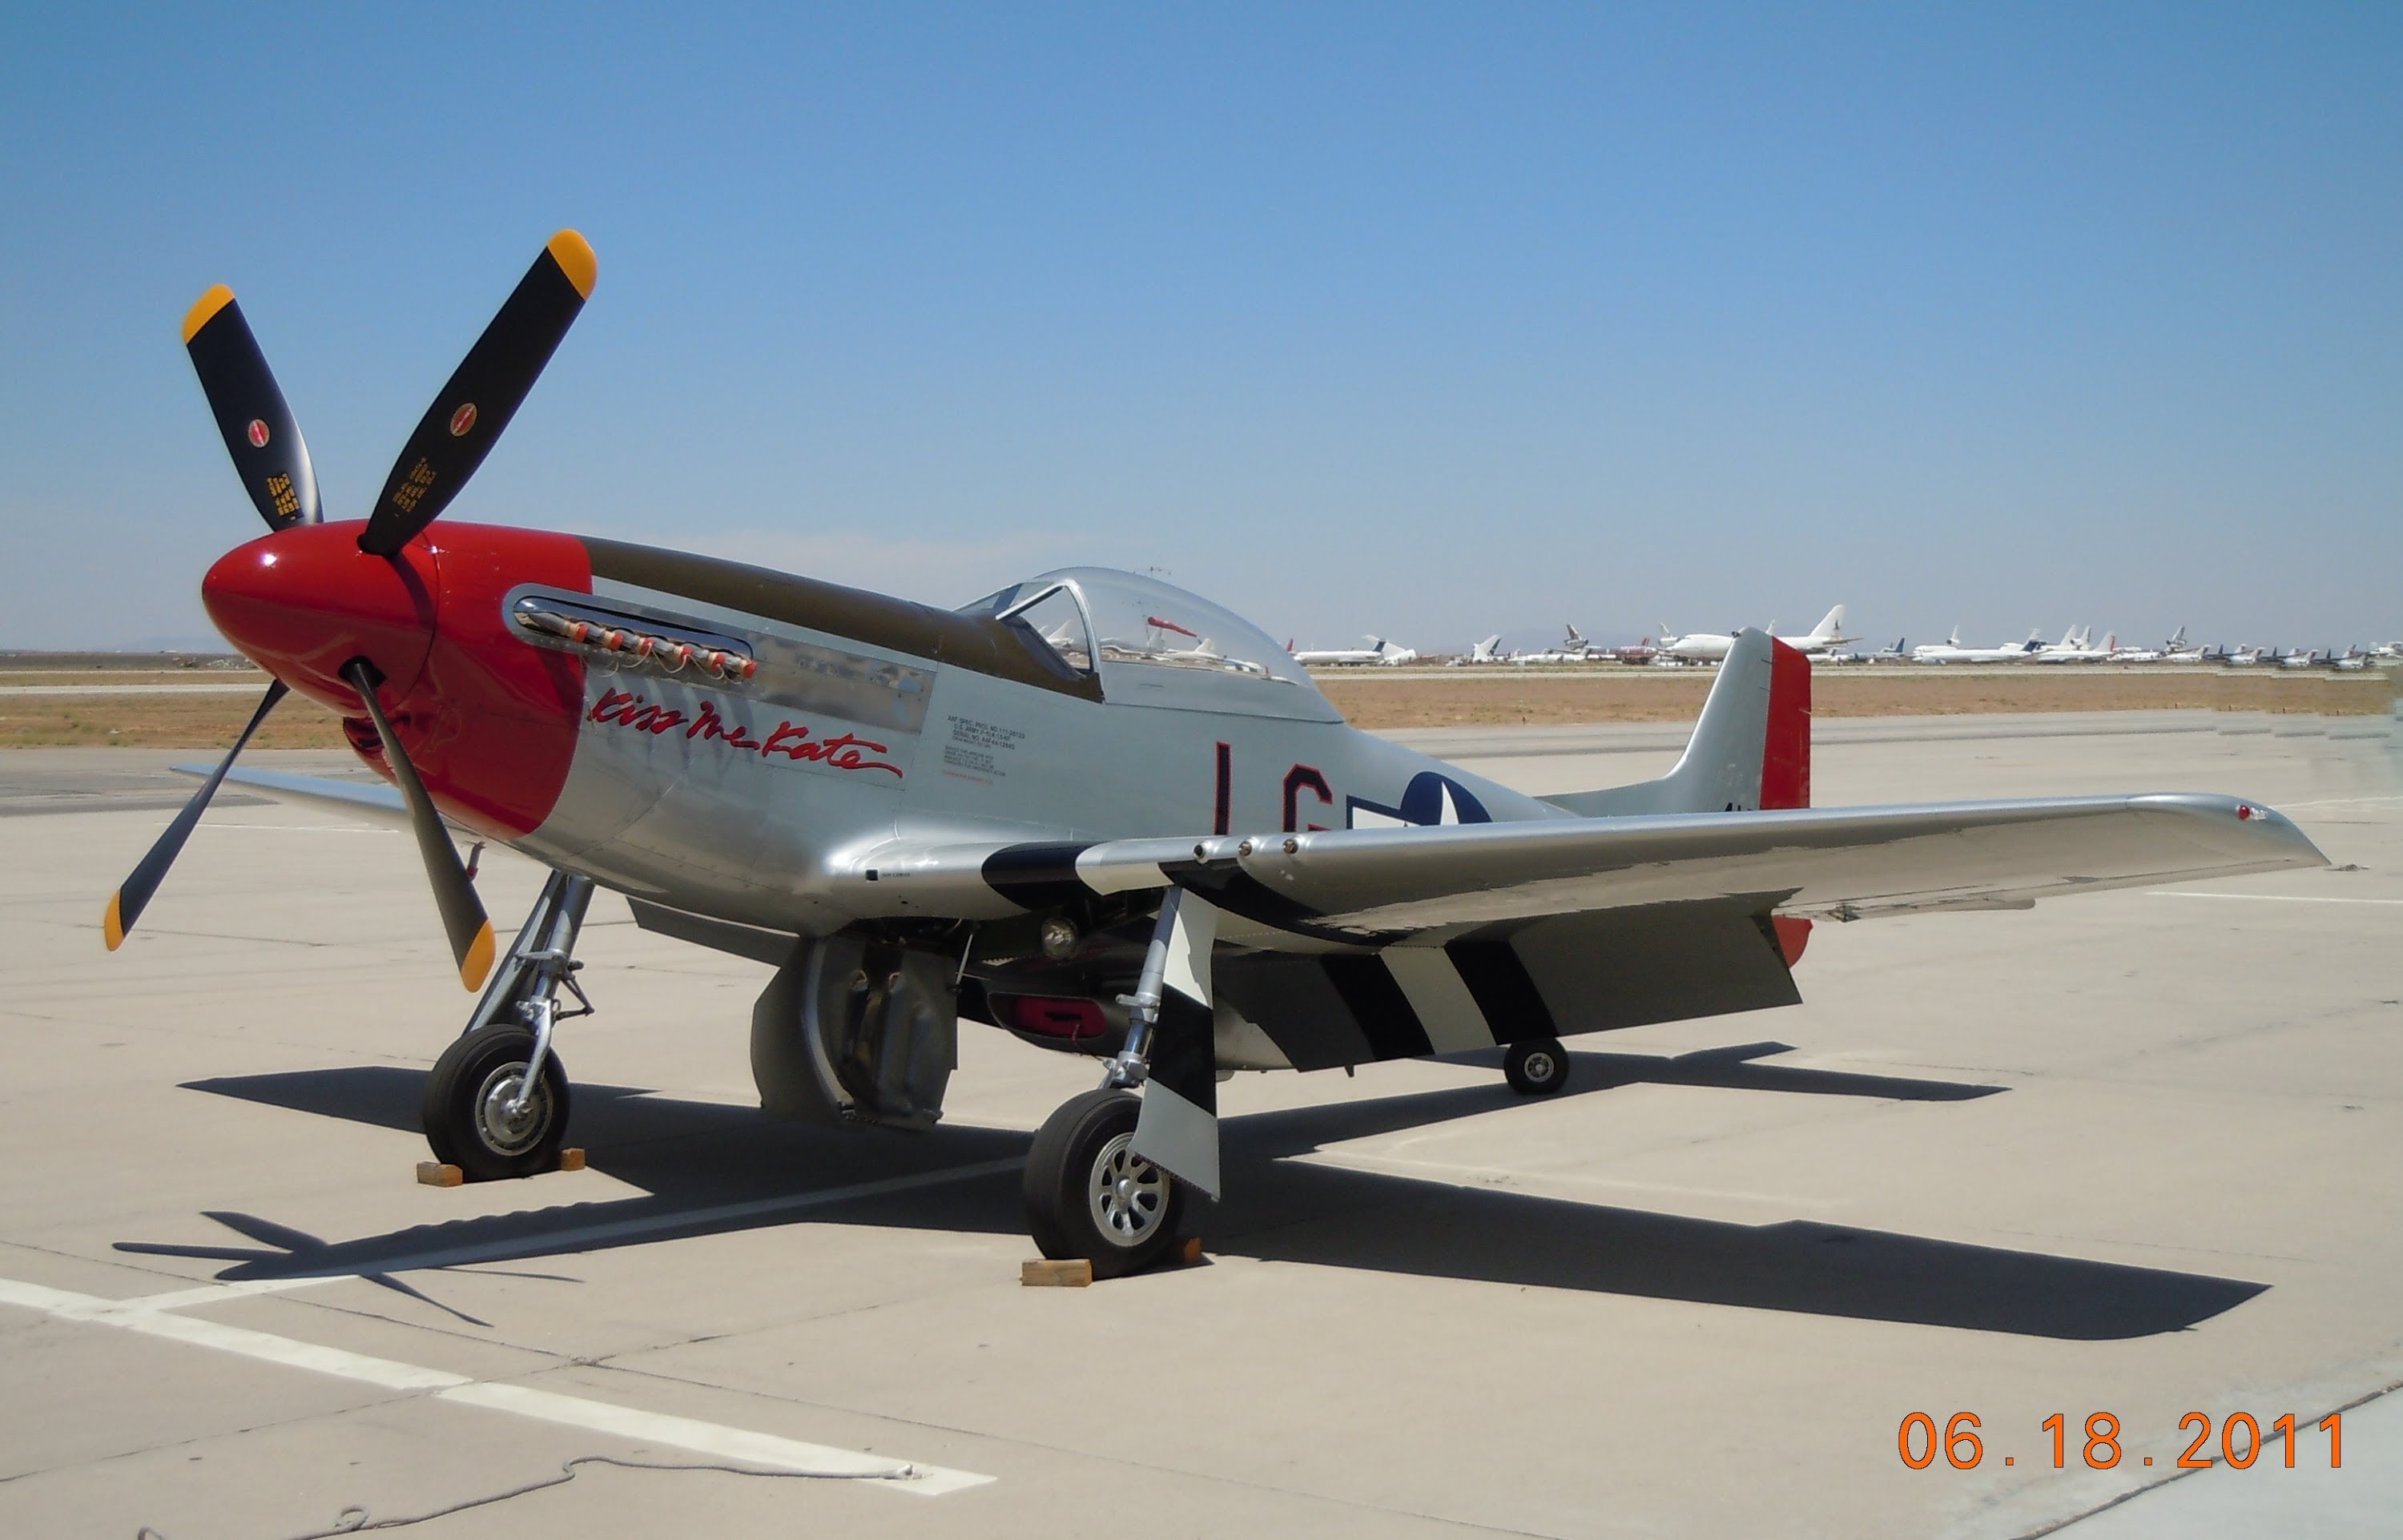 What is the P-51 Mustang fighter plane?